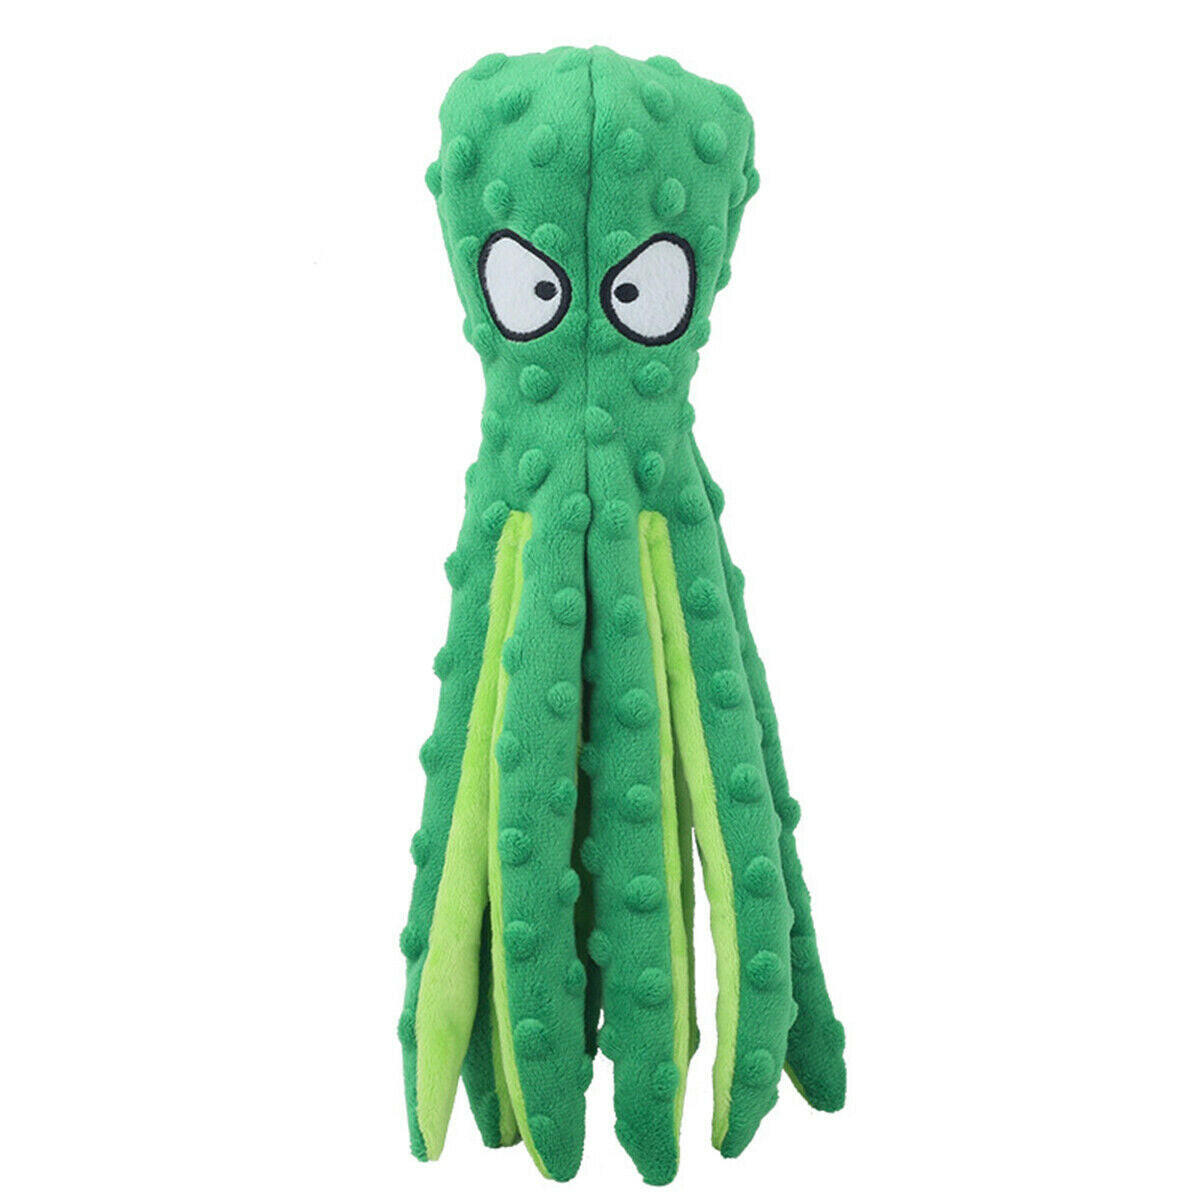 Octopus Puppy Dog Chew Toy: Soft Plush Squeaky Fun Play Sound